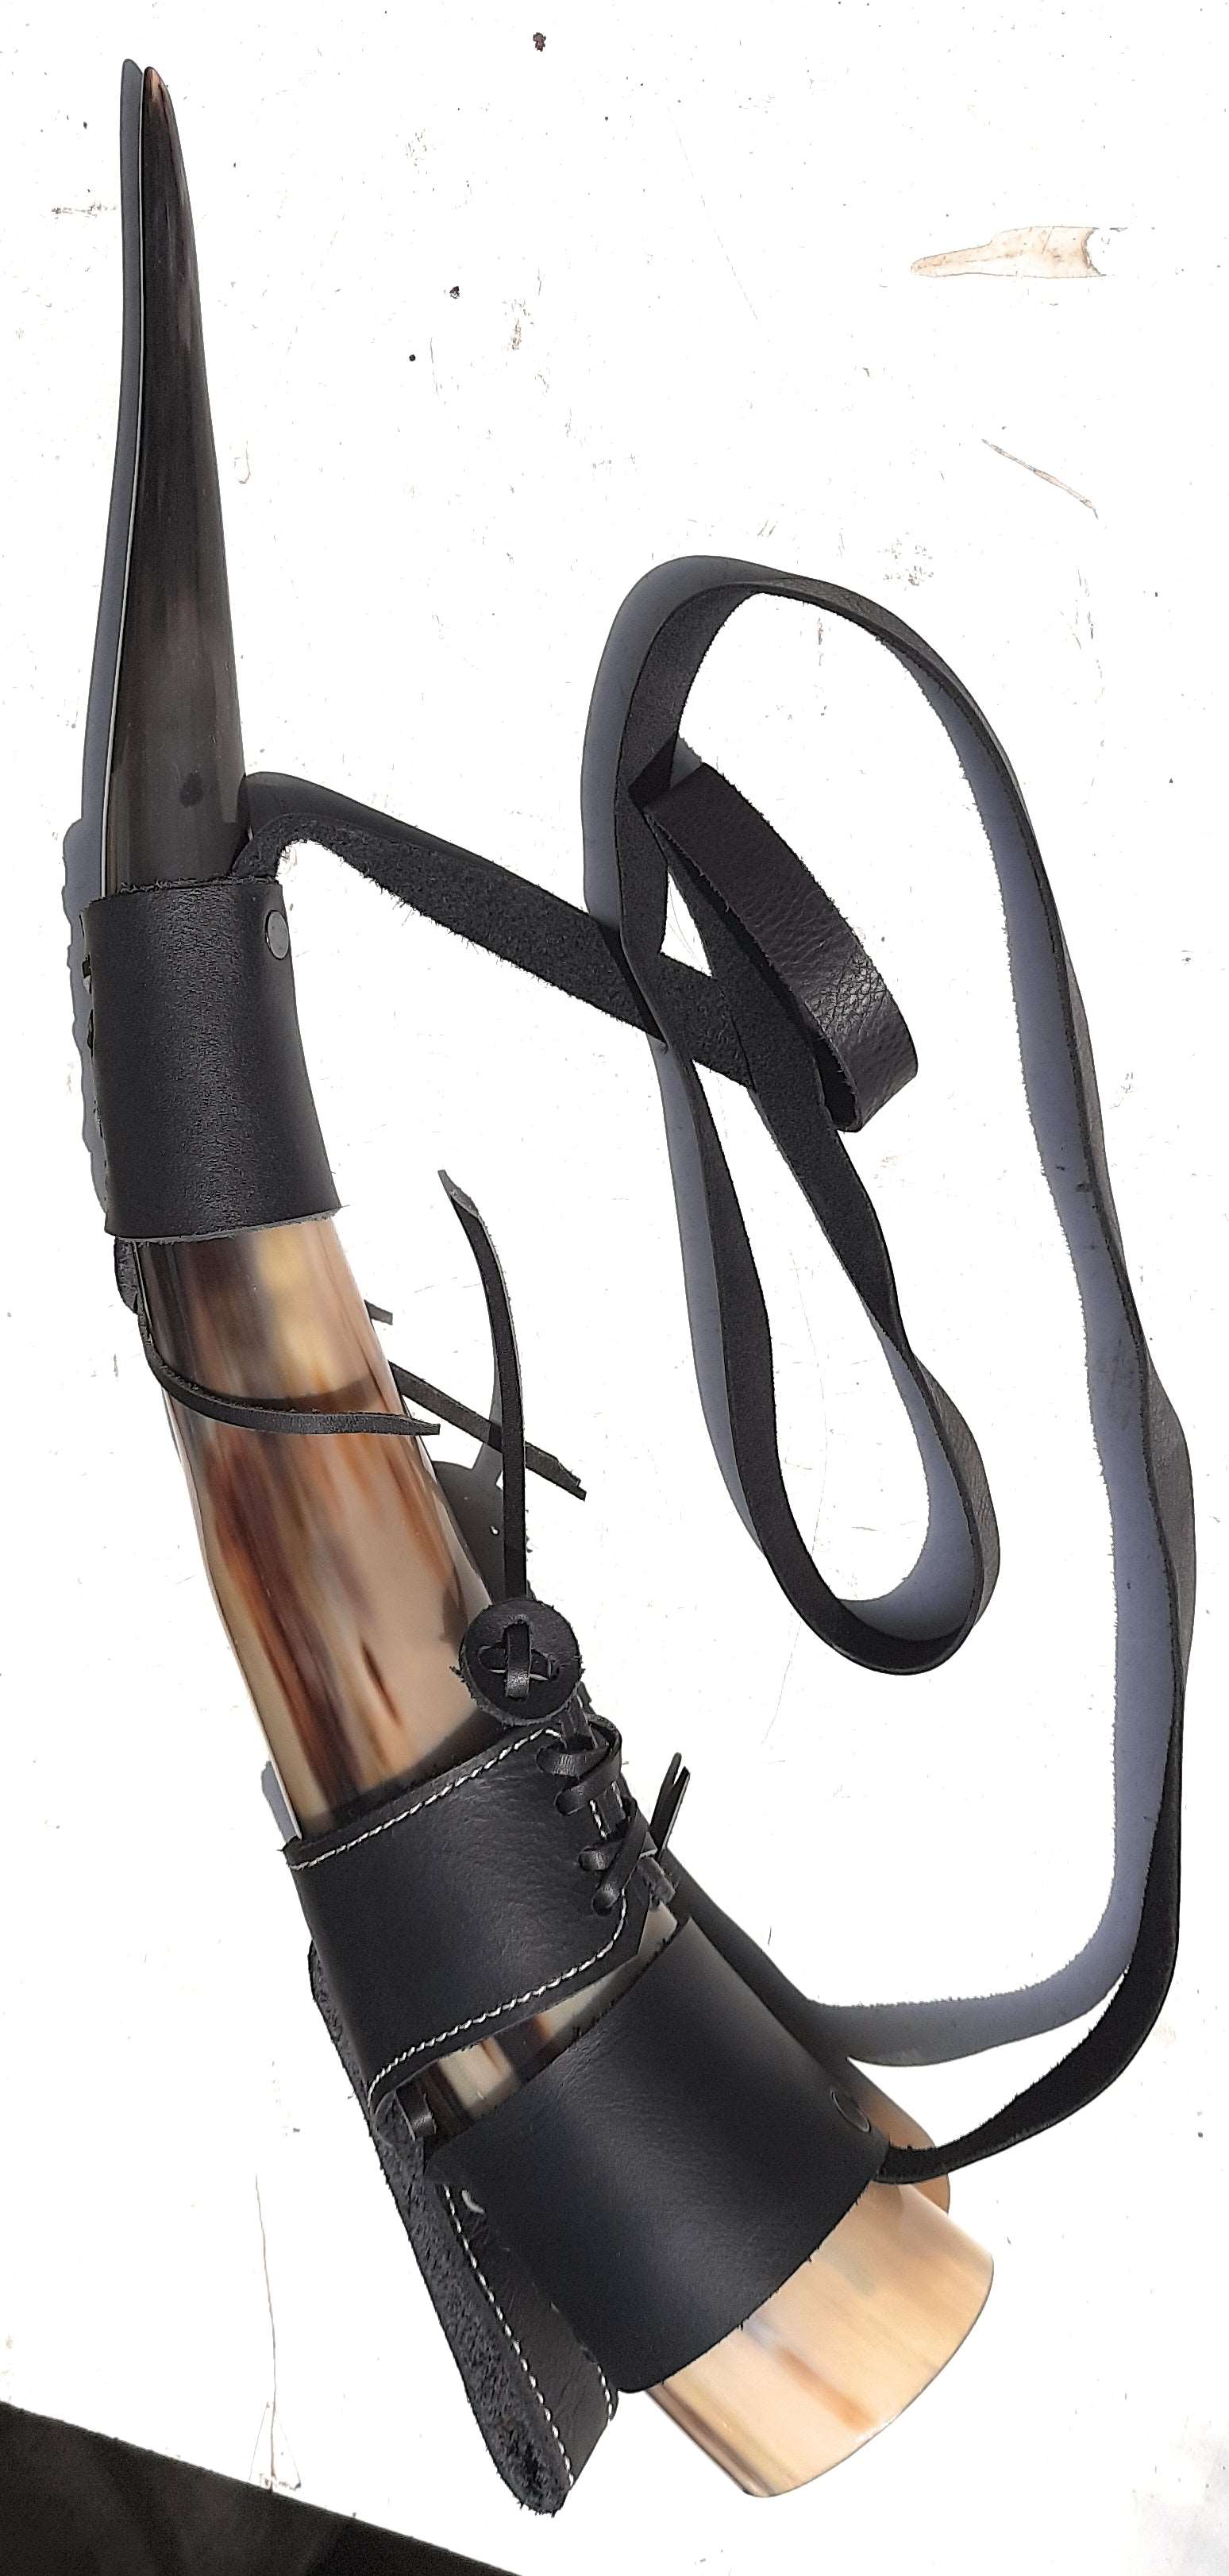 Curved Drinking Horn with Leather Holster